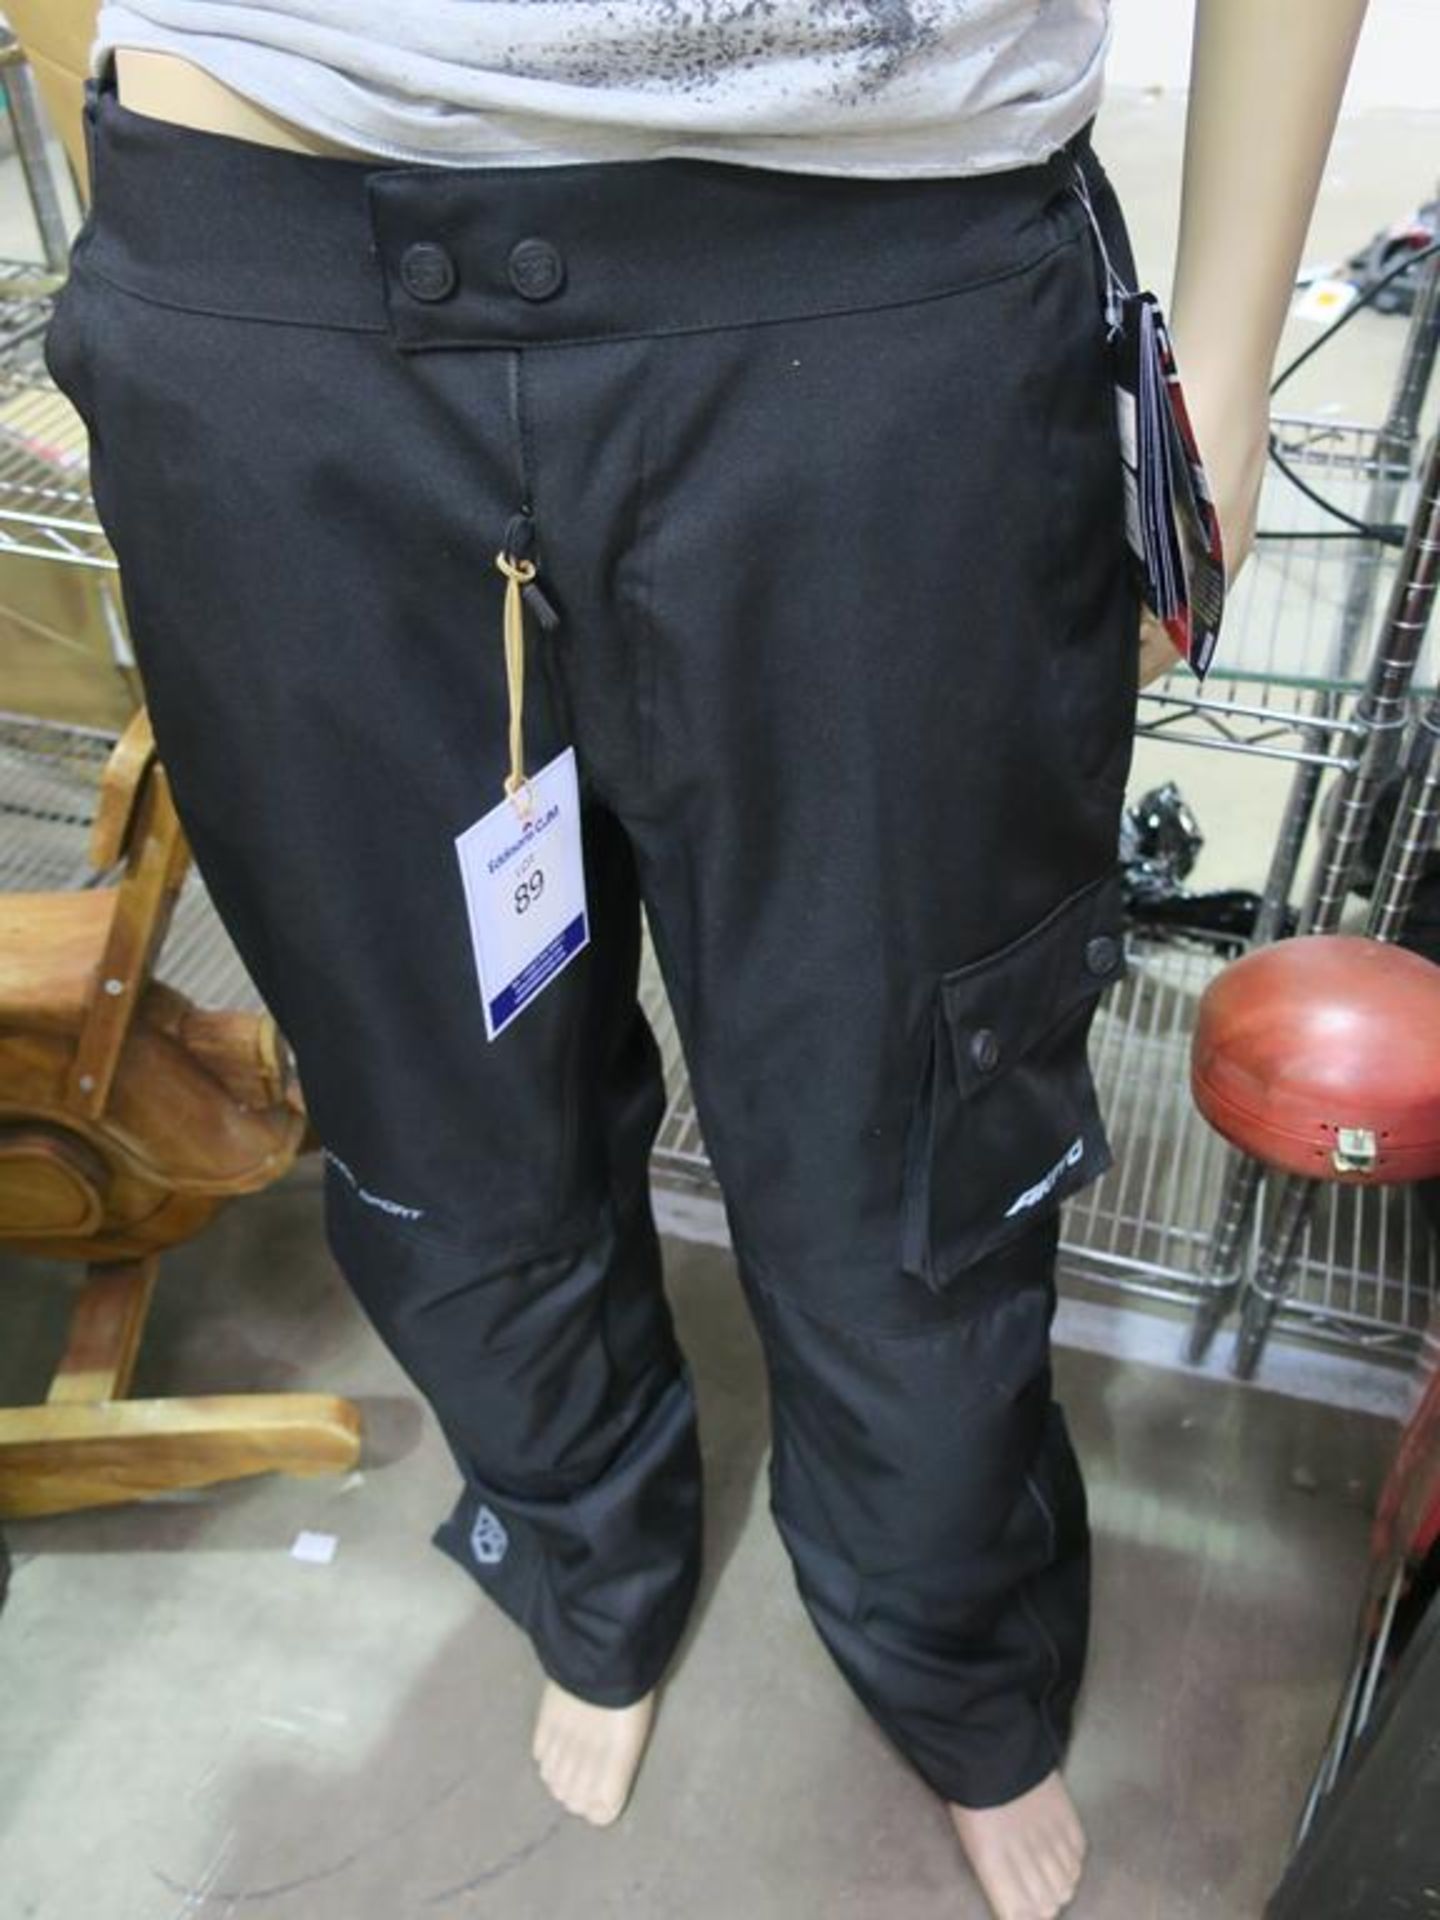 * A pair of Python Sport Pants in Black size XL (RRP £65.00)